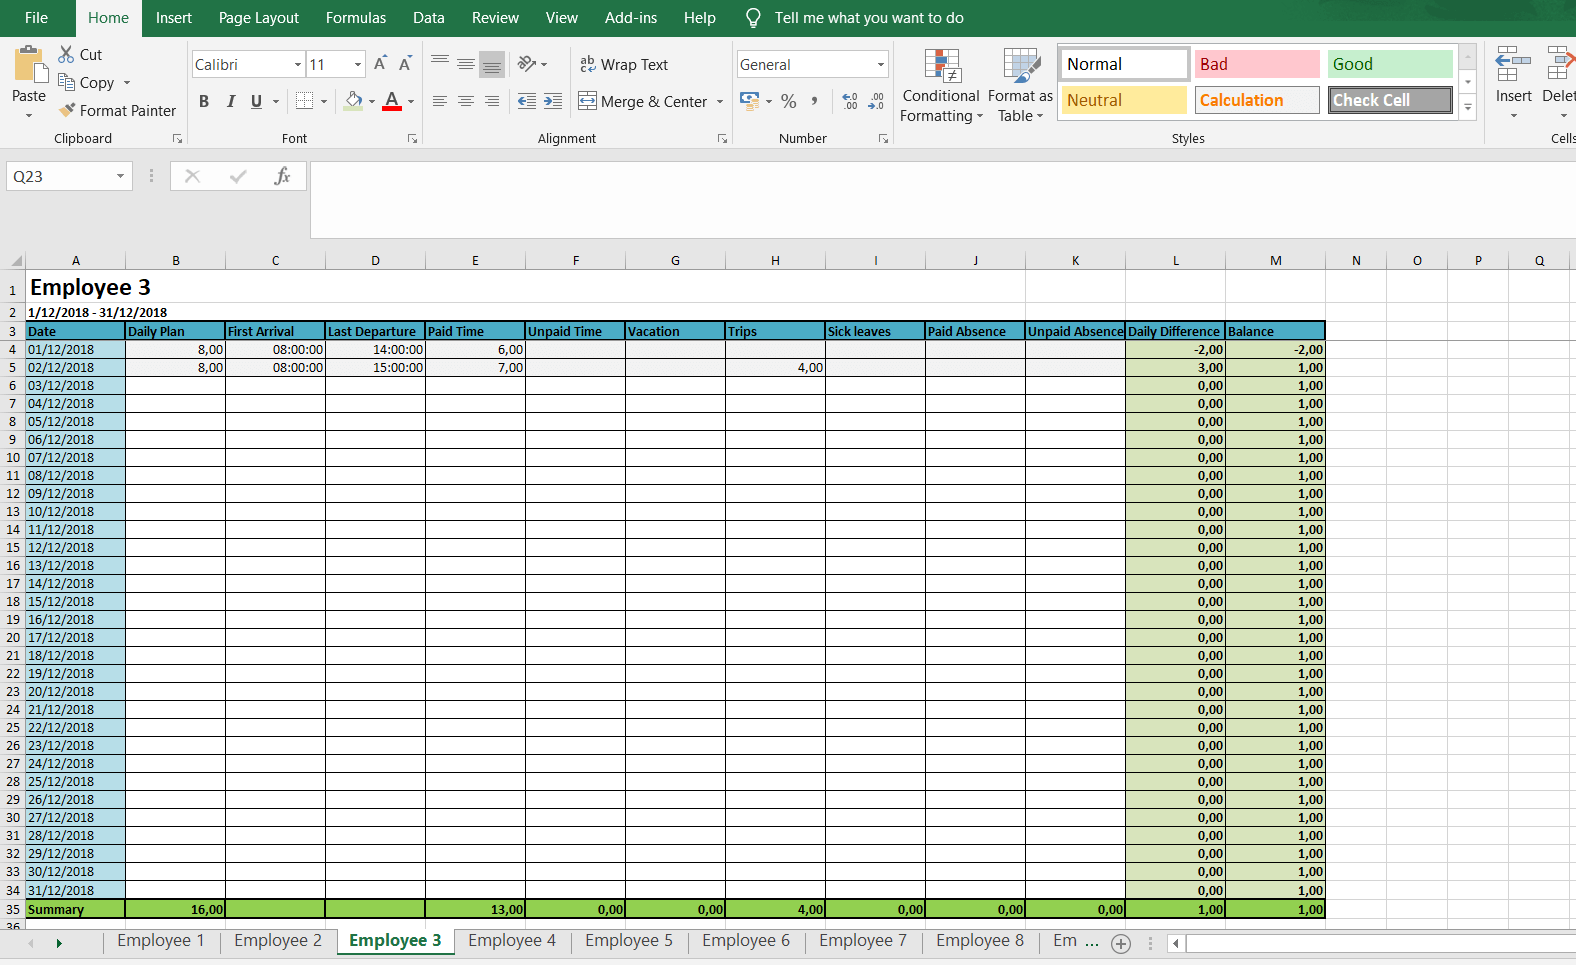 excel timesheet template download